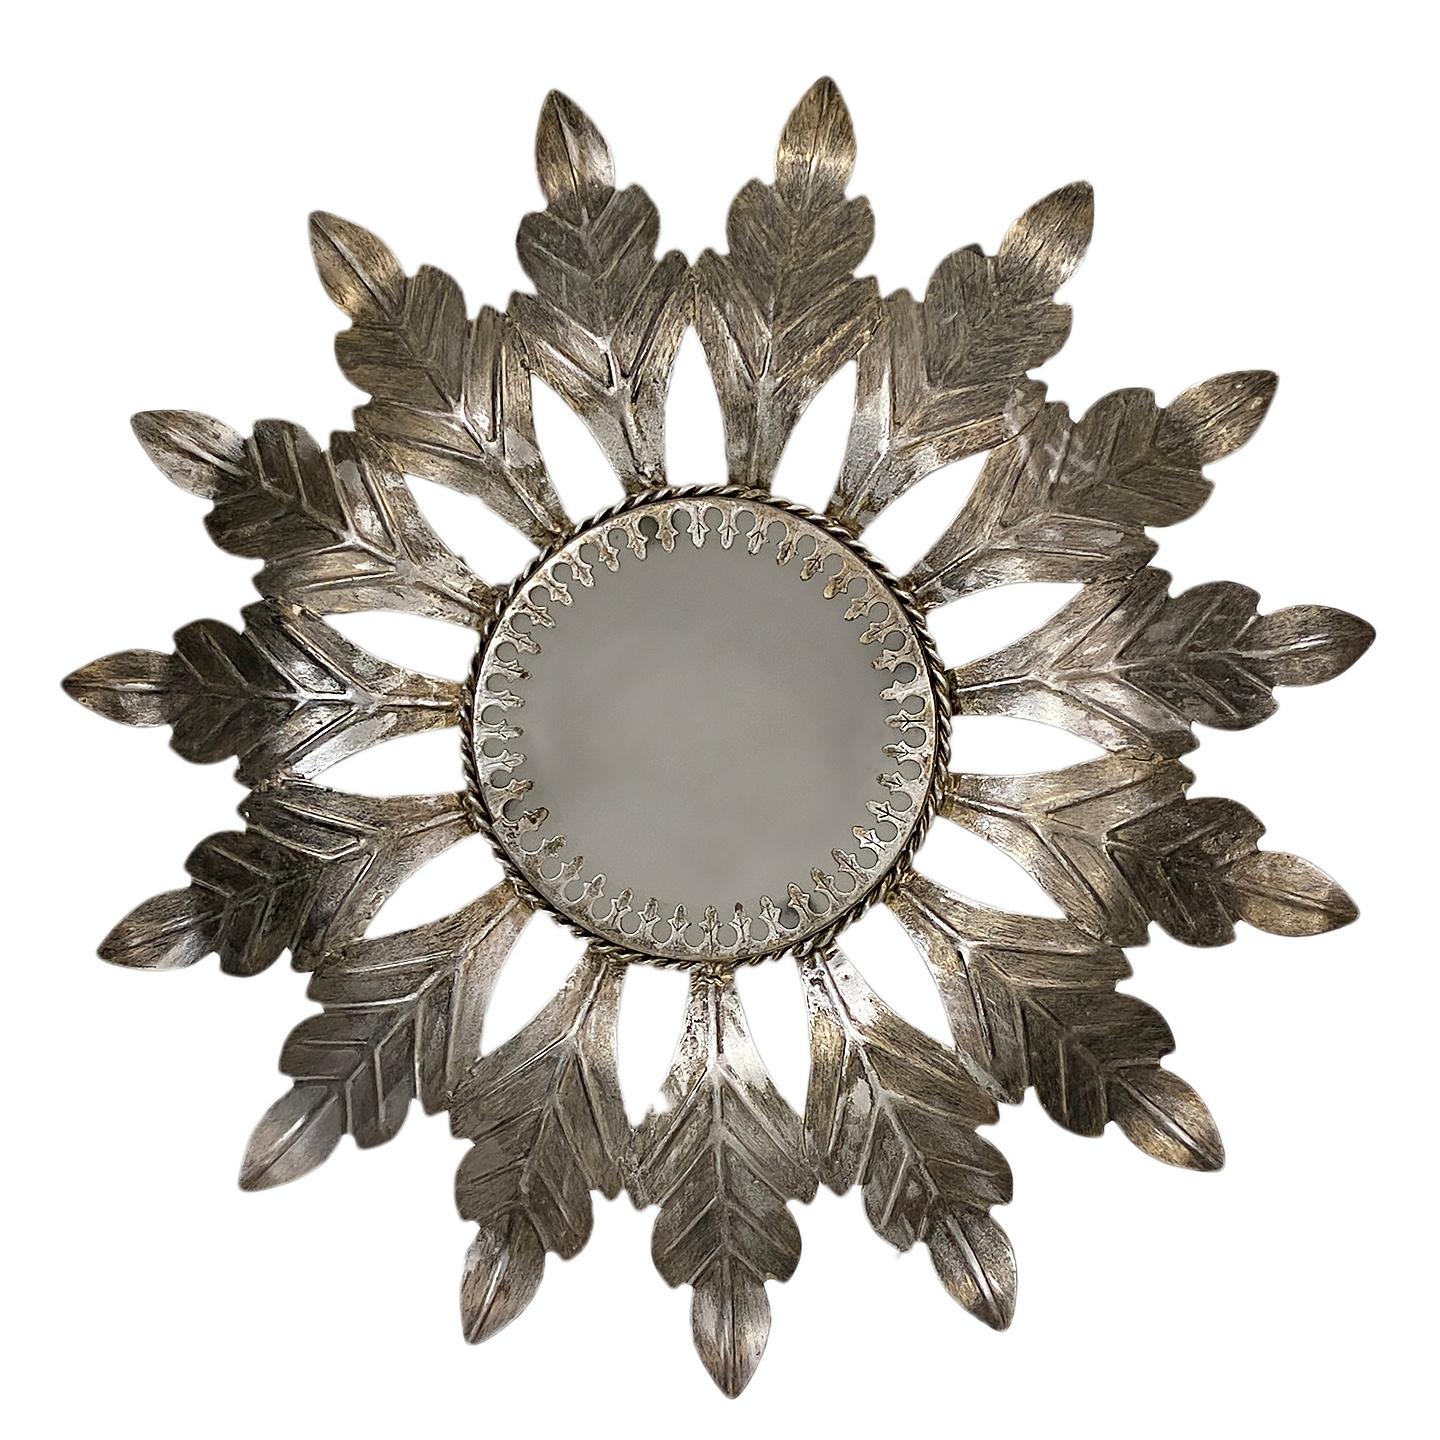 A circa 1950's Italian silver leaf sunburst pendant light fixture with glass inset and two candelabra lights.

Measurements:
Drop: 8